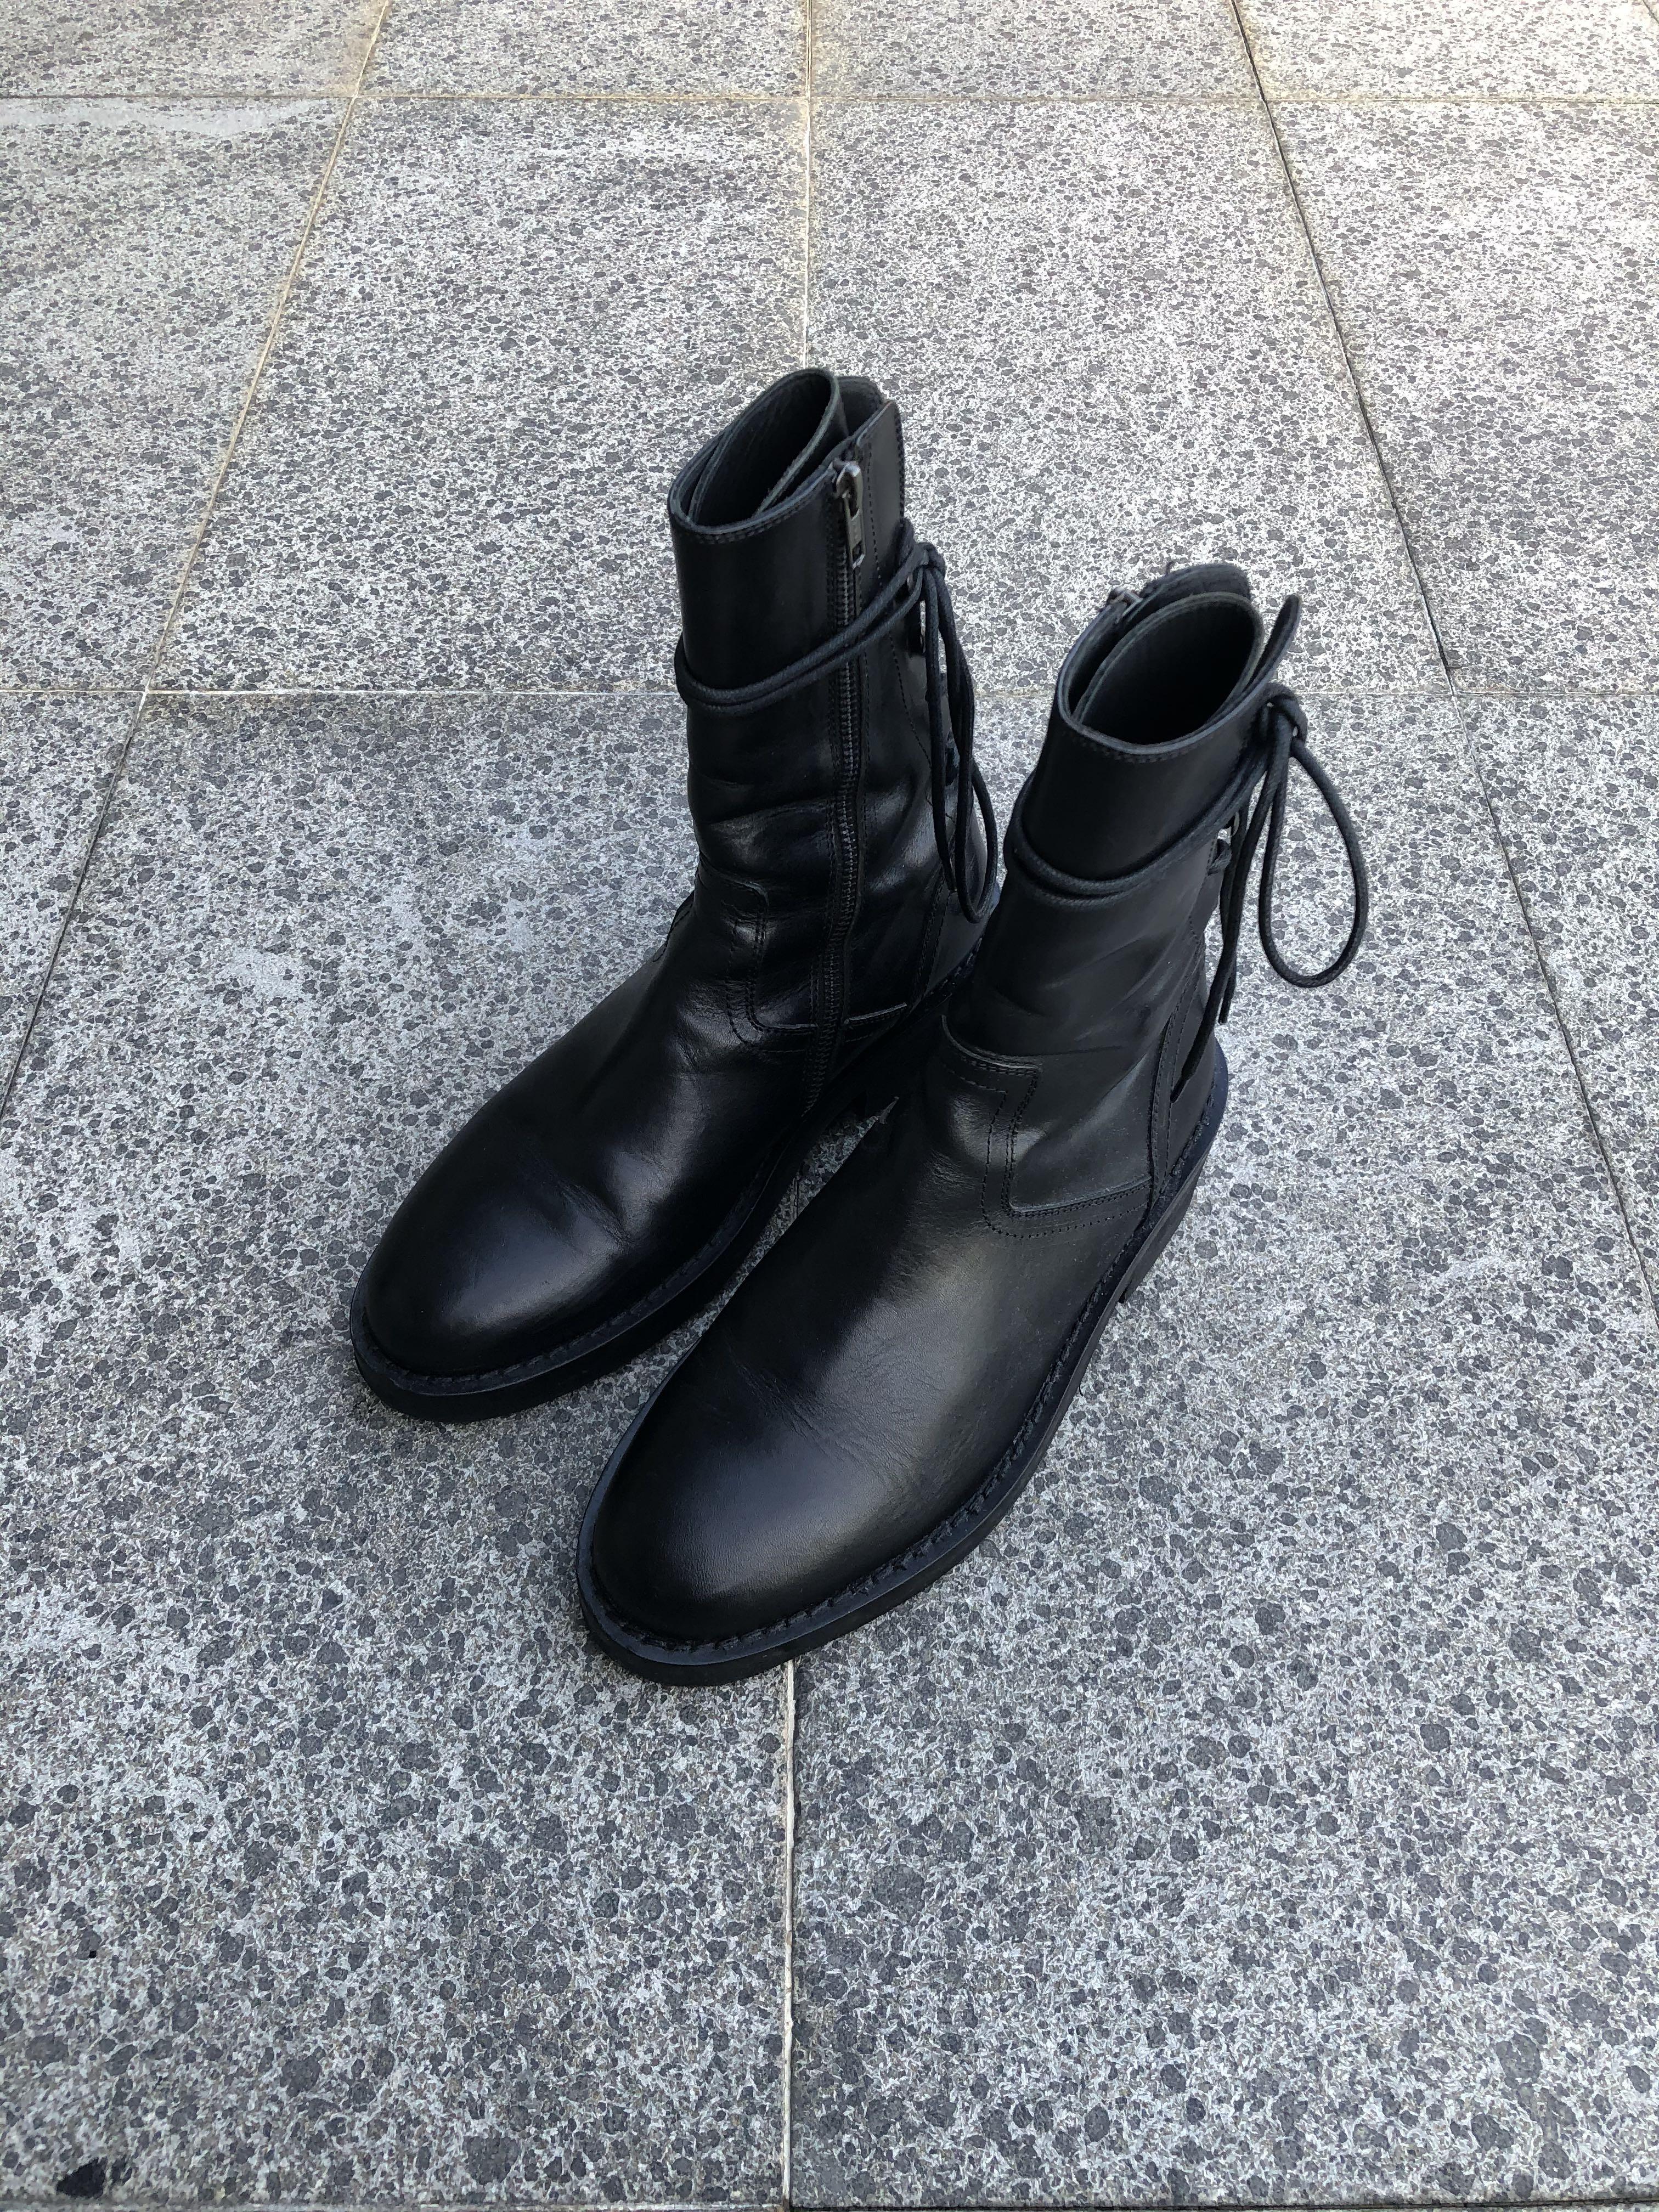 leather combat boots mens